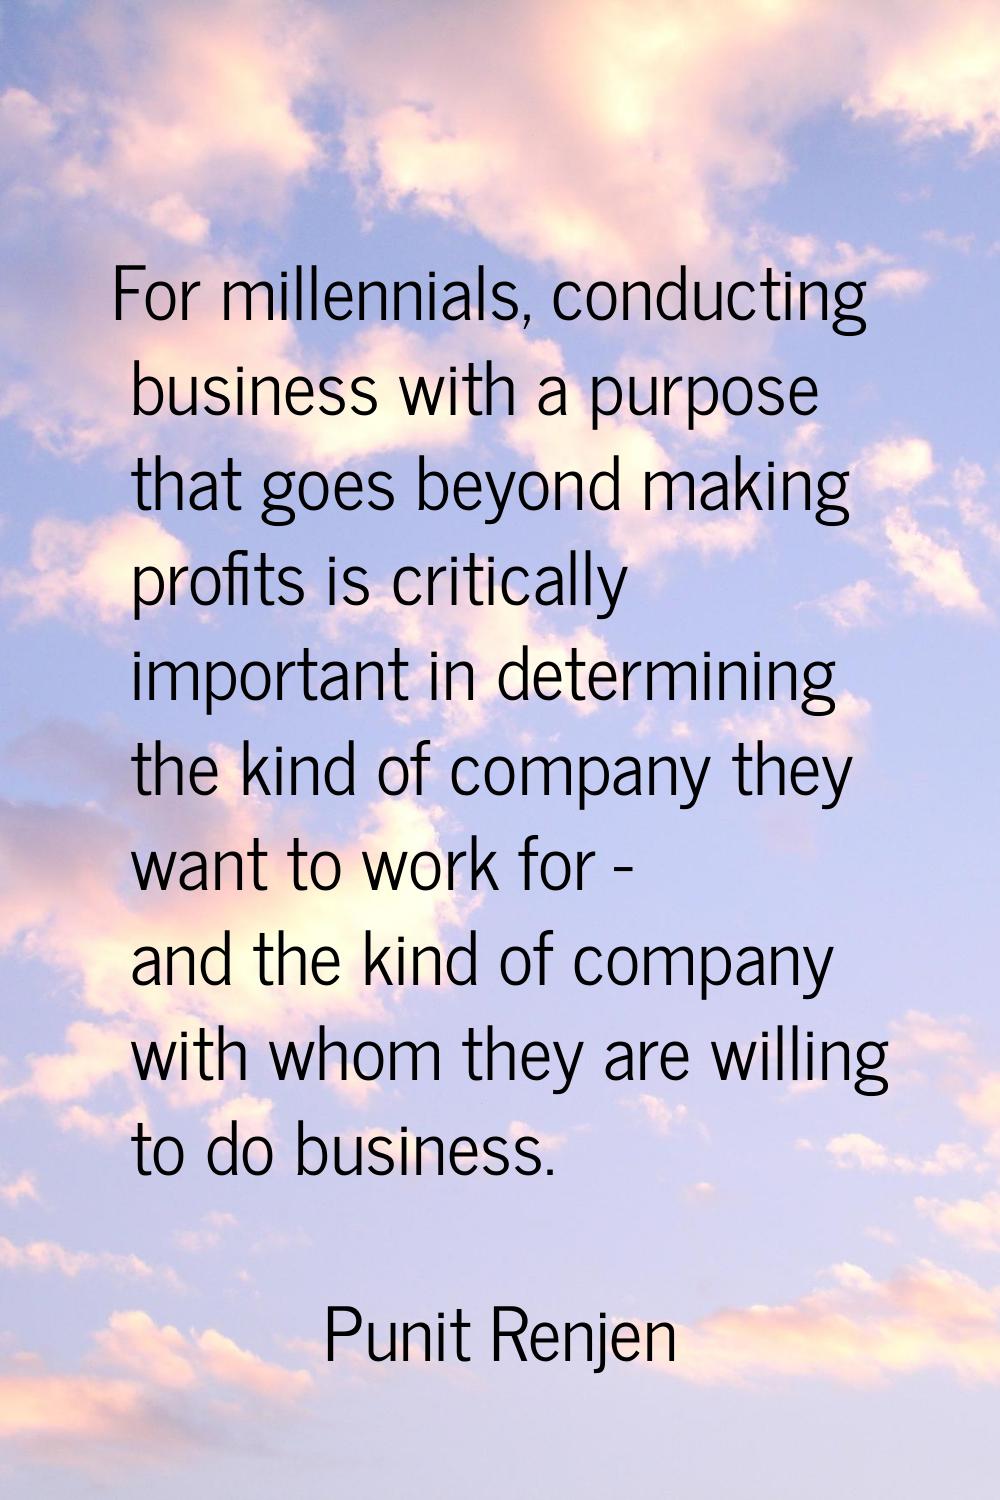 For millennials, conducting business with a purpose that goes beyond making profits is critically i